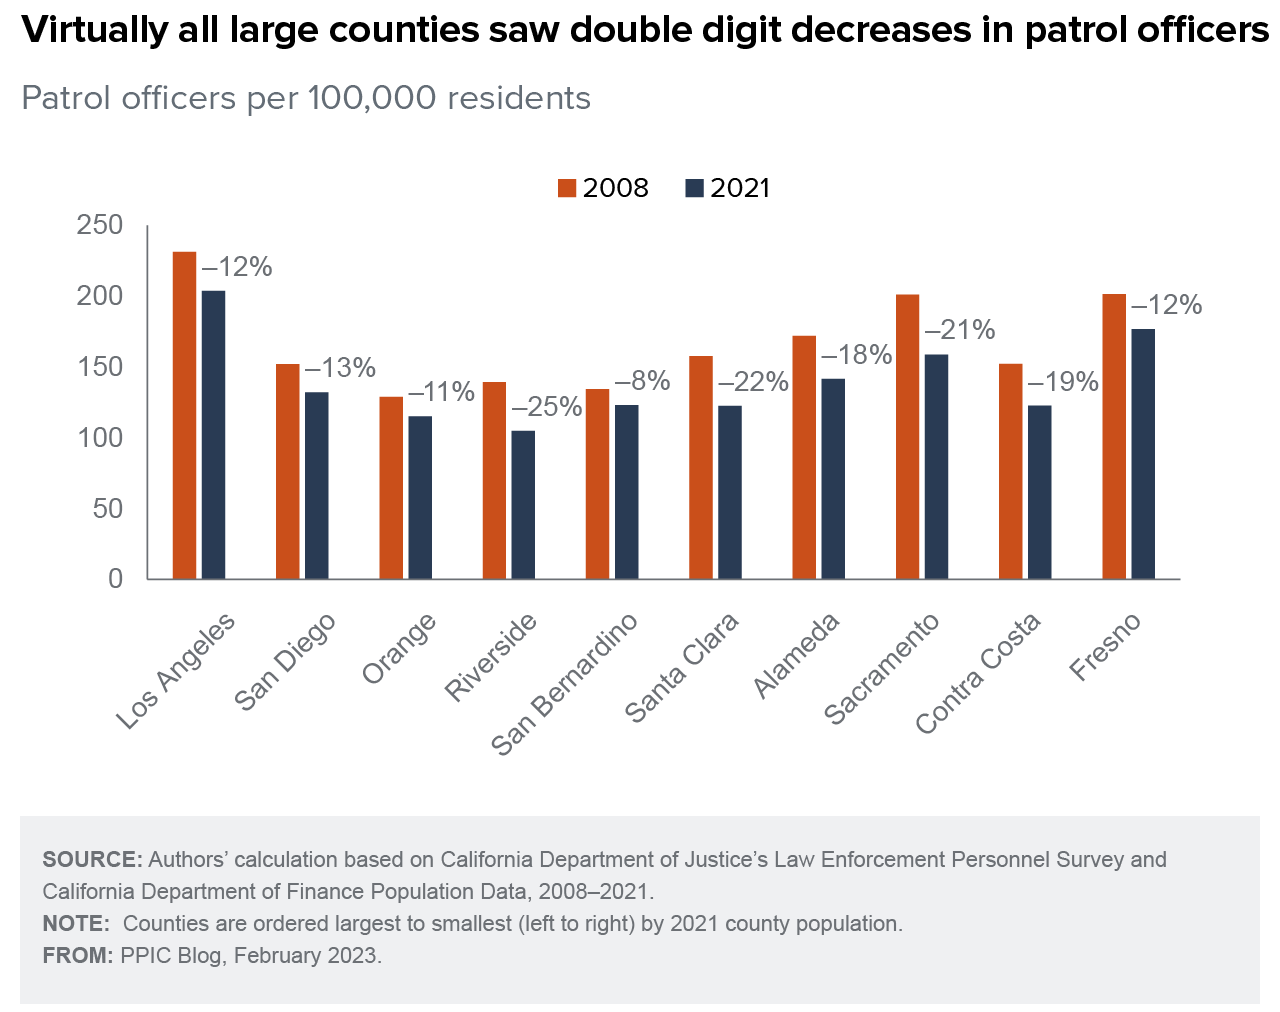 figure - Virtually all large counties saw double digit decreases in patrol officers